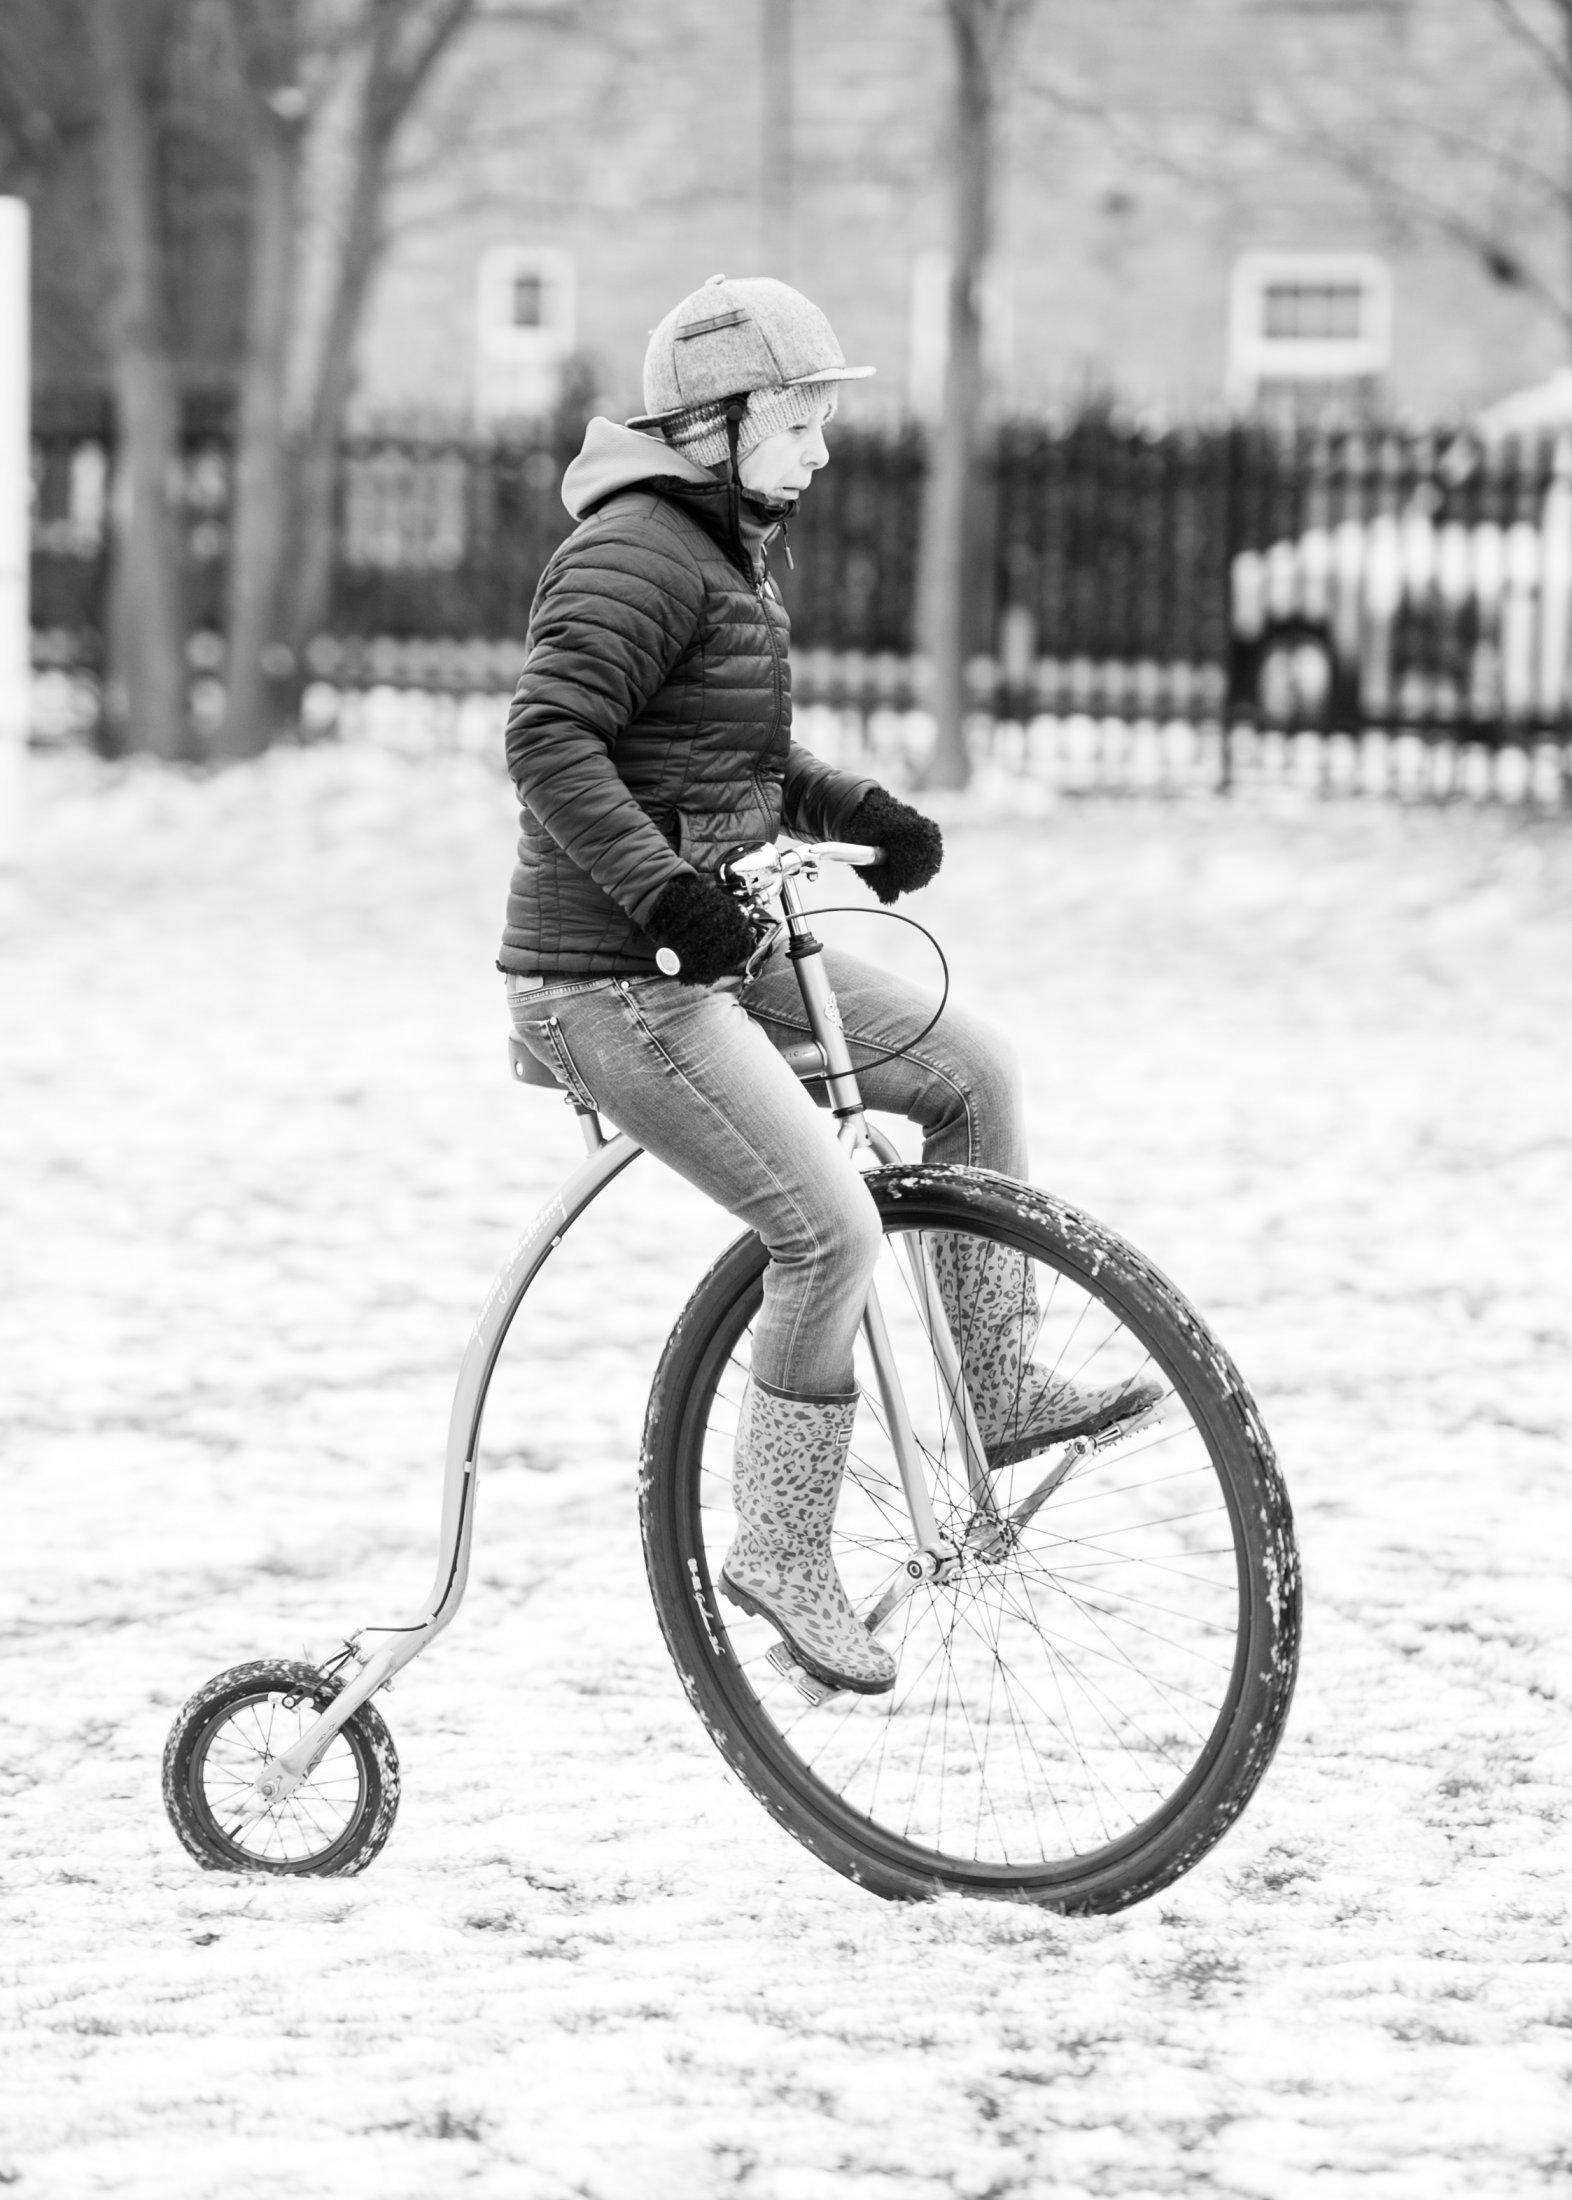 Penny-farthing recreation at Victoria Recreation Ground, Wheels of Time. Photo: Charlotte Levy